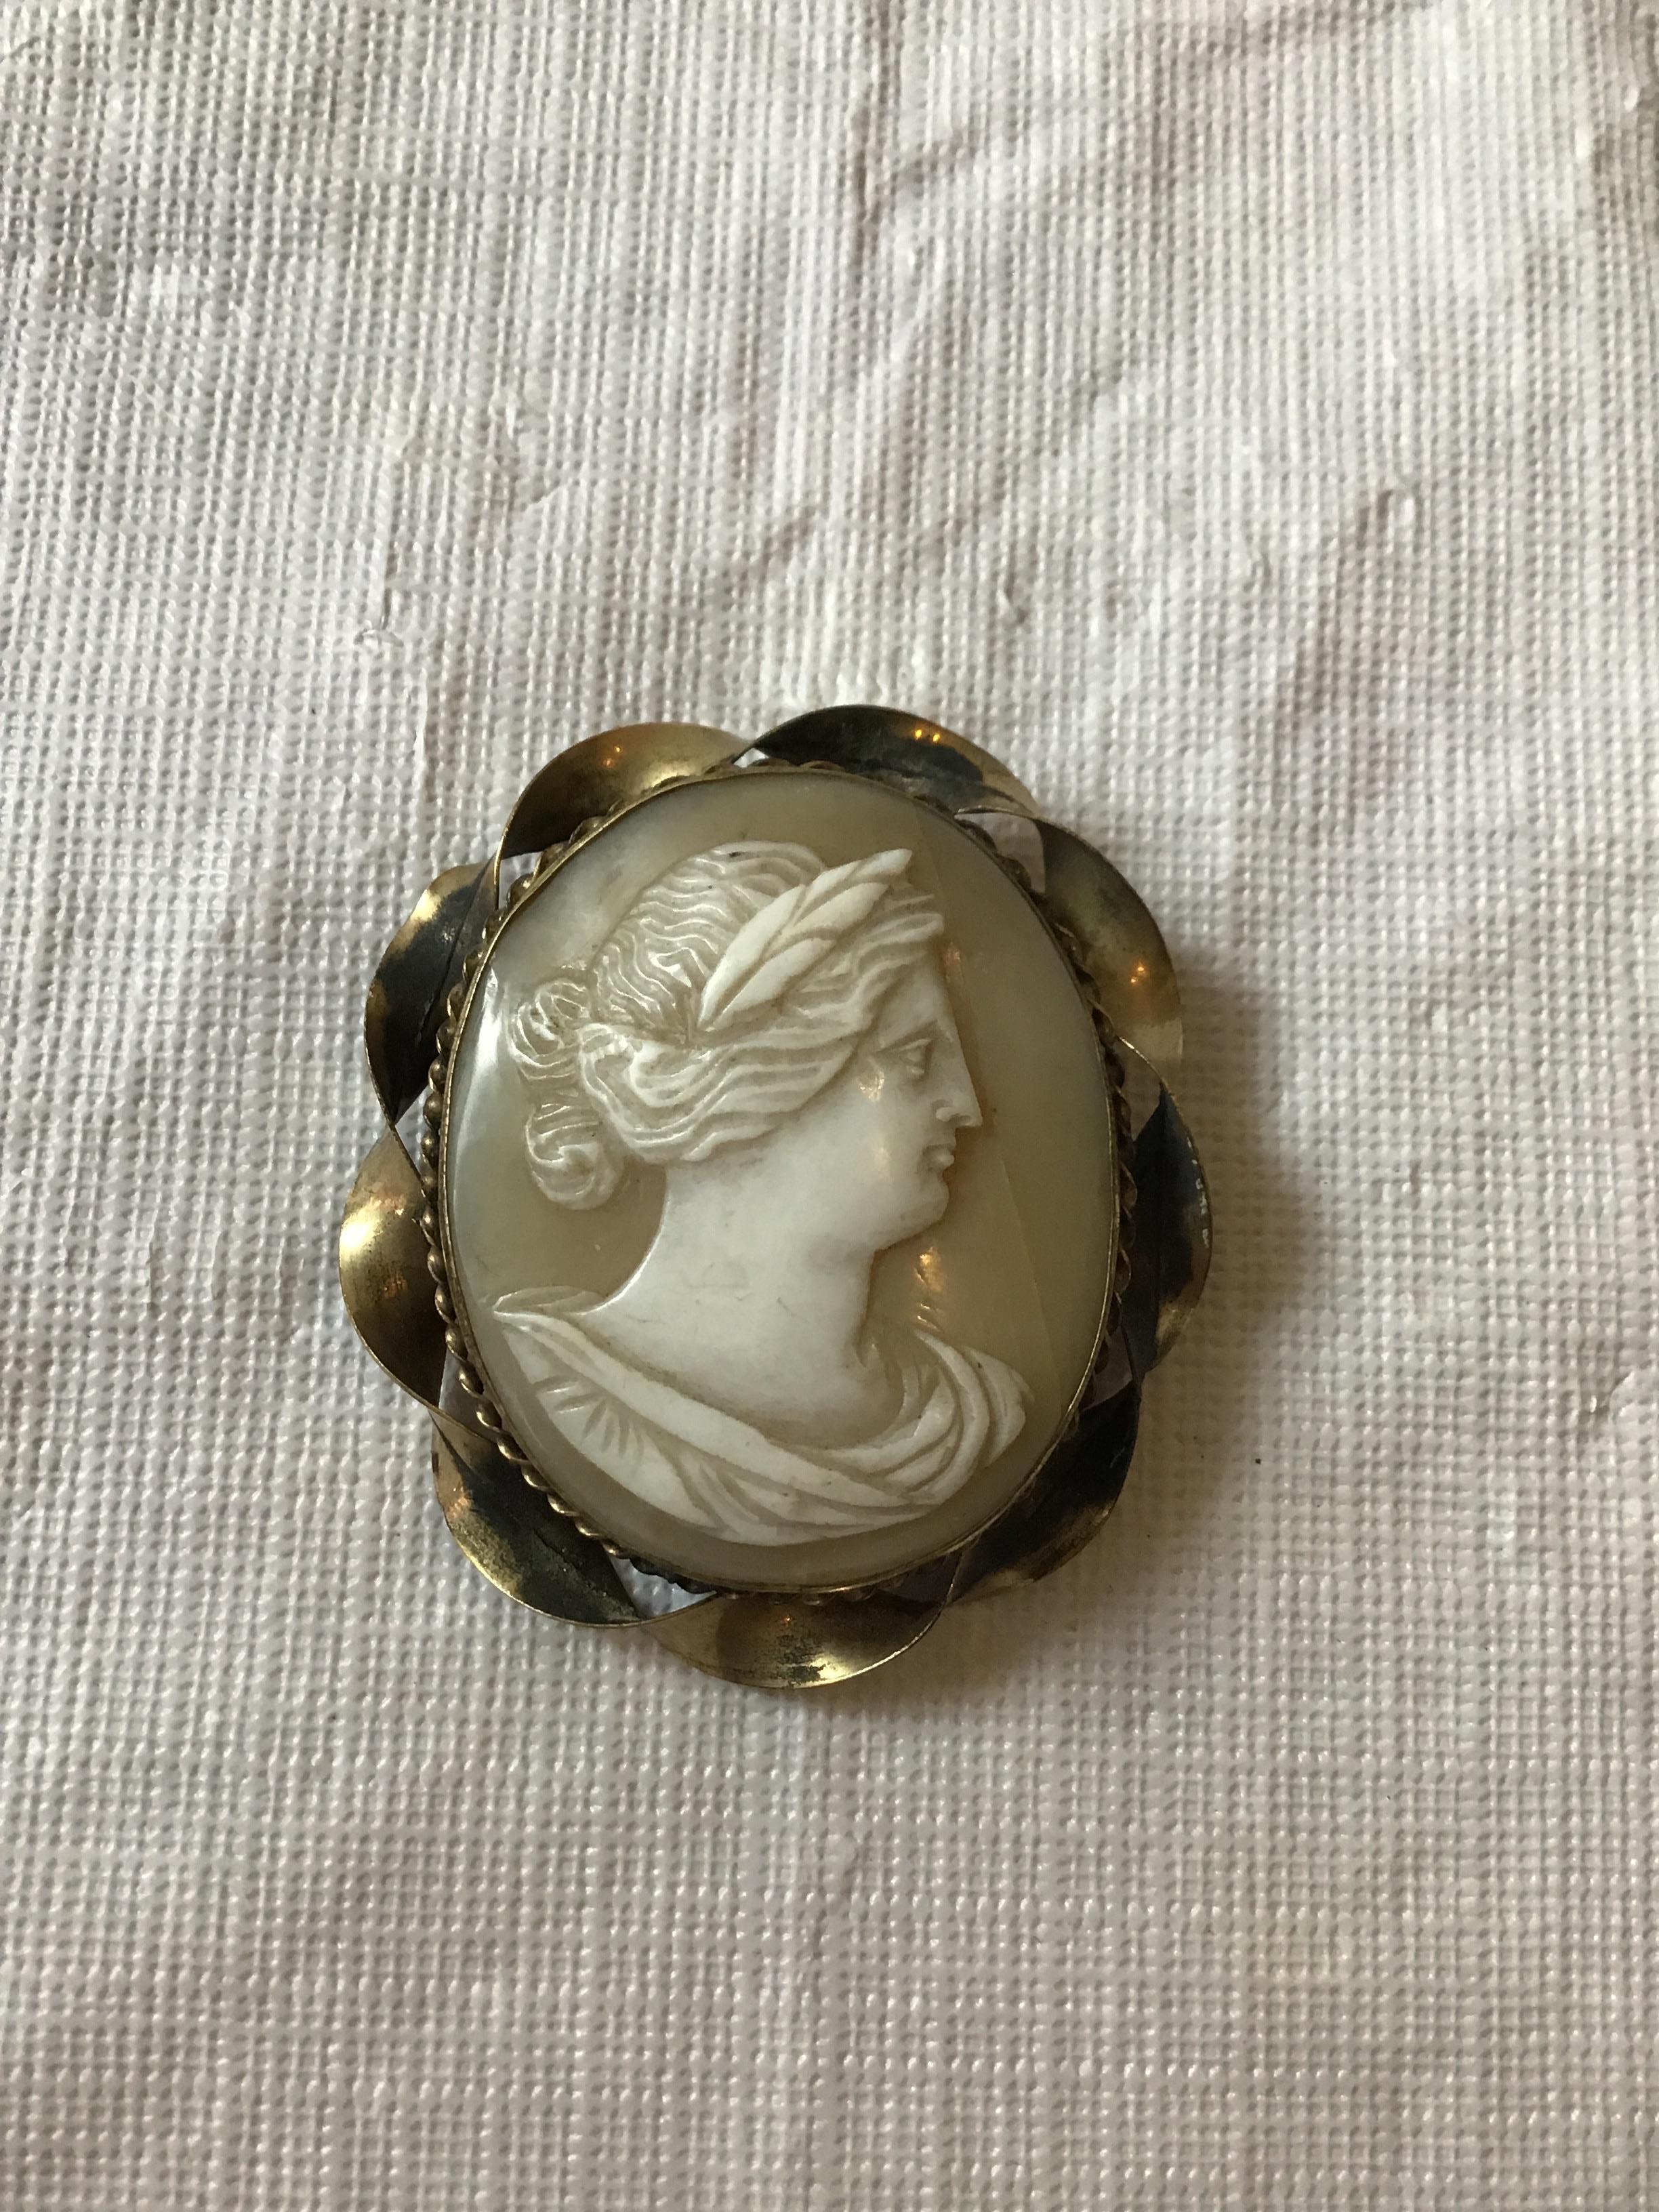 1880s carved out of shell, cameo. Brass casing.